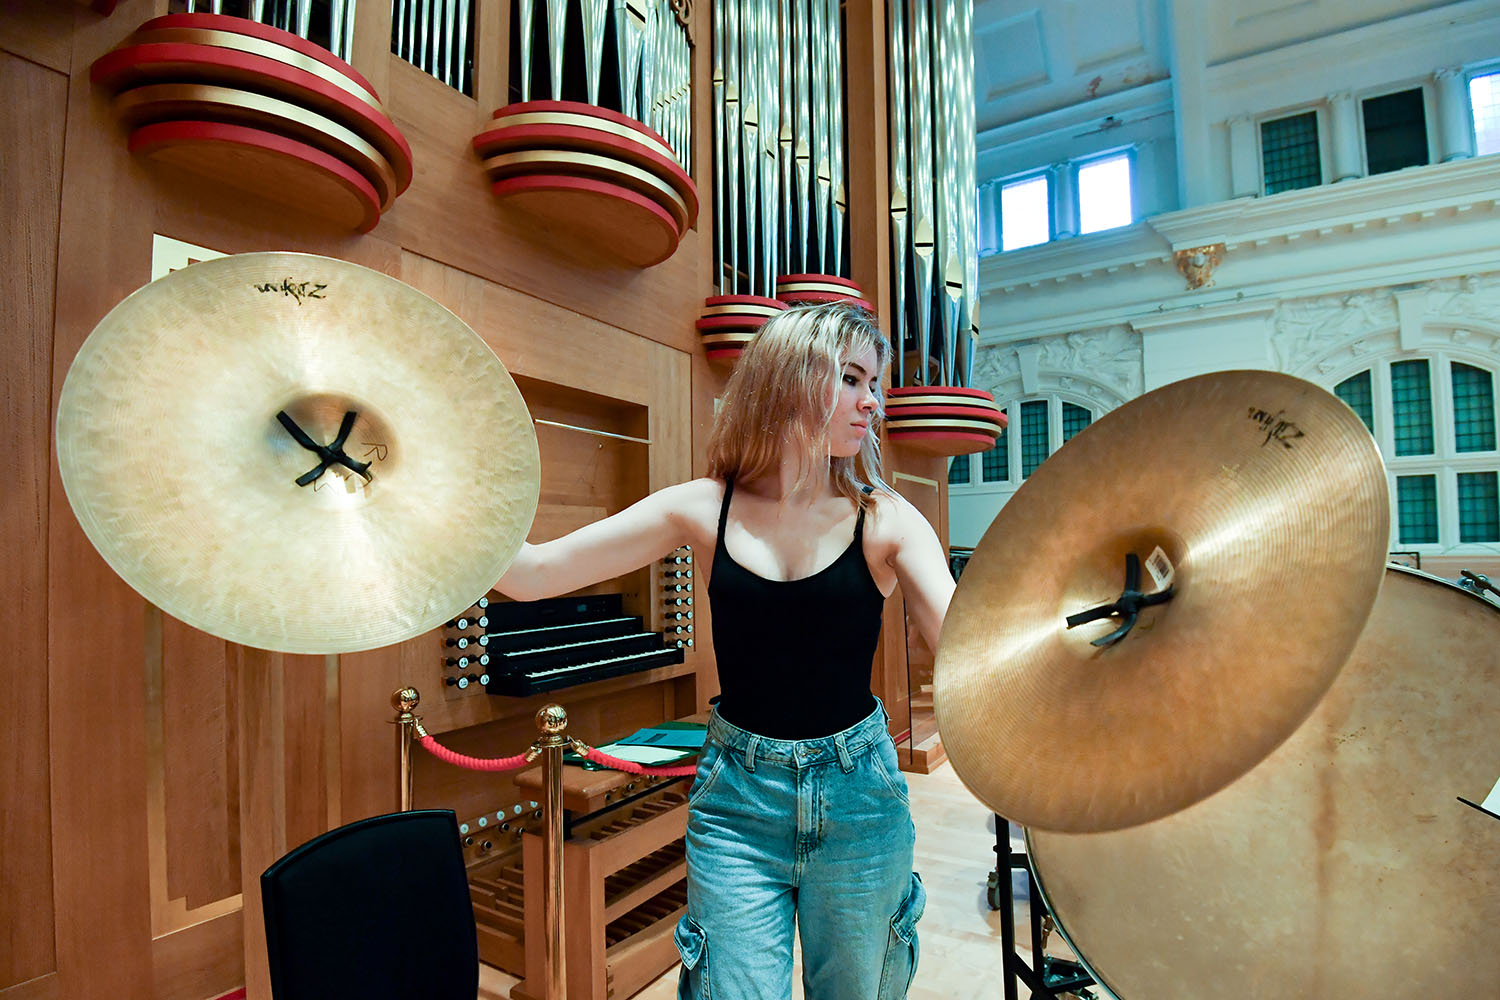 A percussionist holding large cymbals